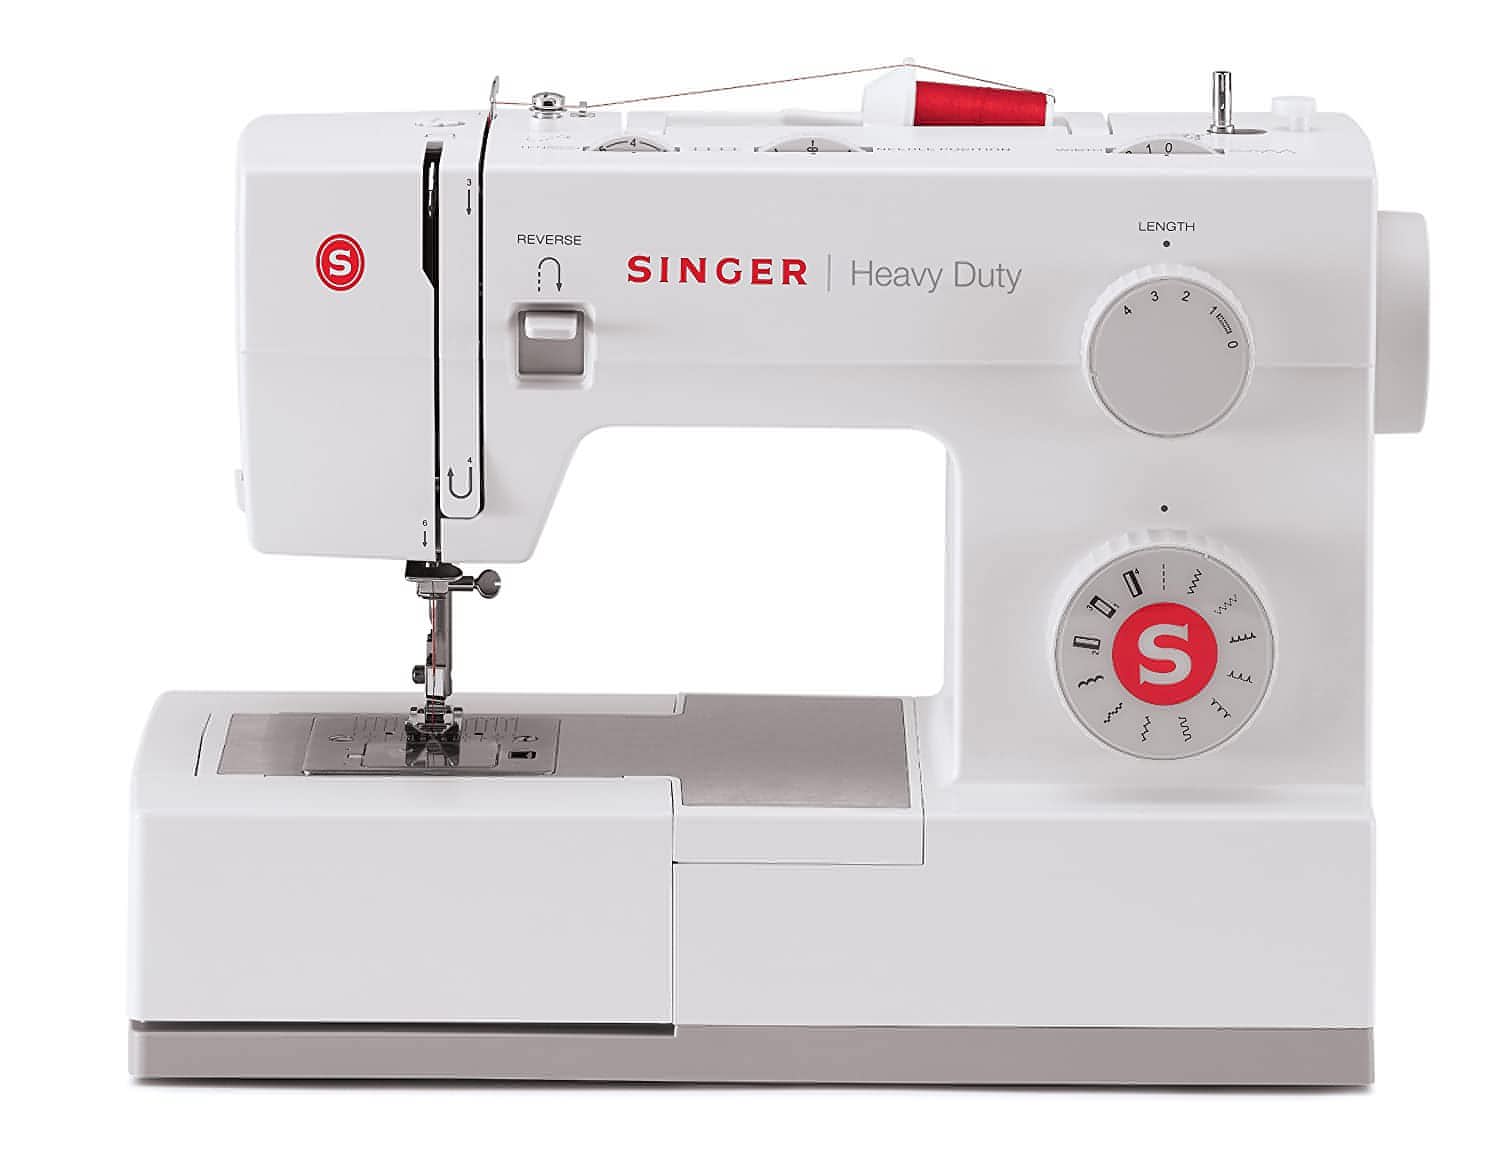 Singer Heavy Duty 5511 Sewing Machine - 30% faster, 60% stronger